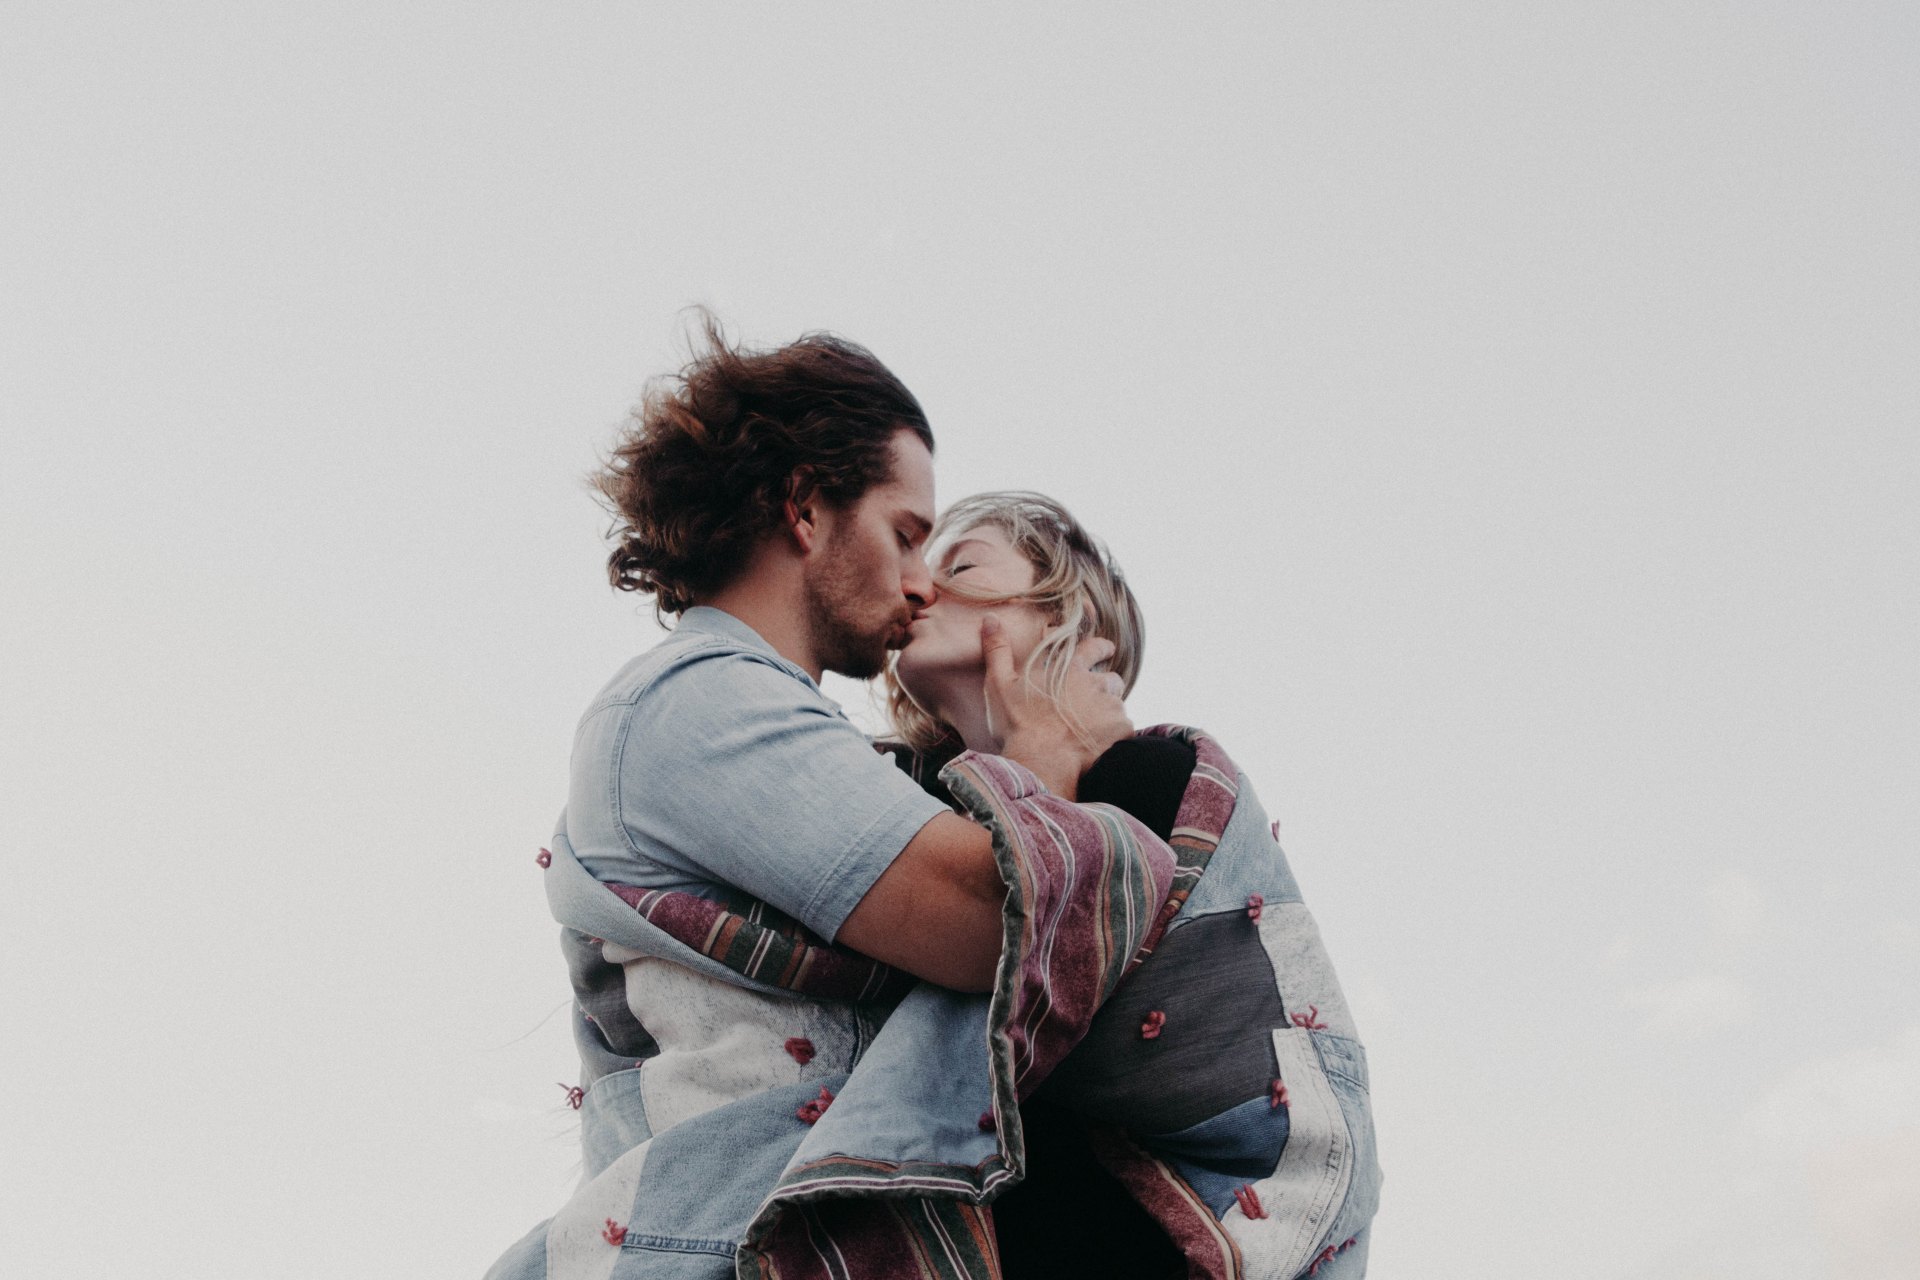 50 Unhappy Couples Share How Their Partner Completely Changed After Marriage